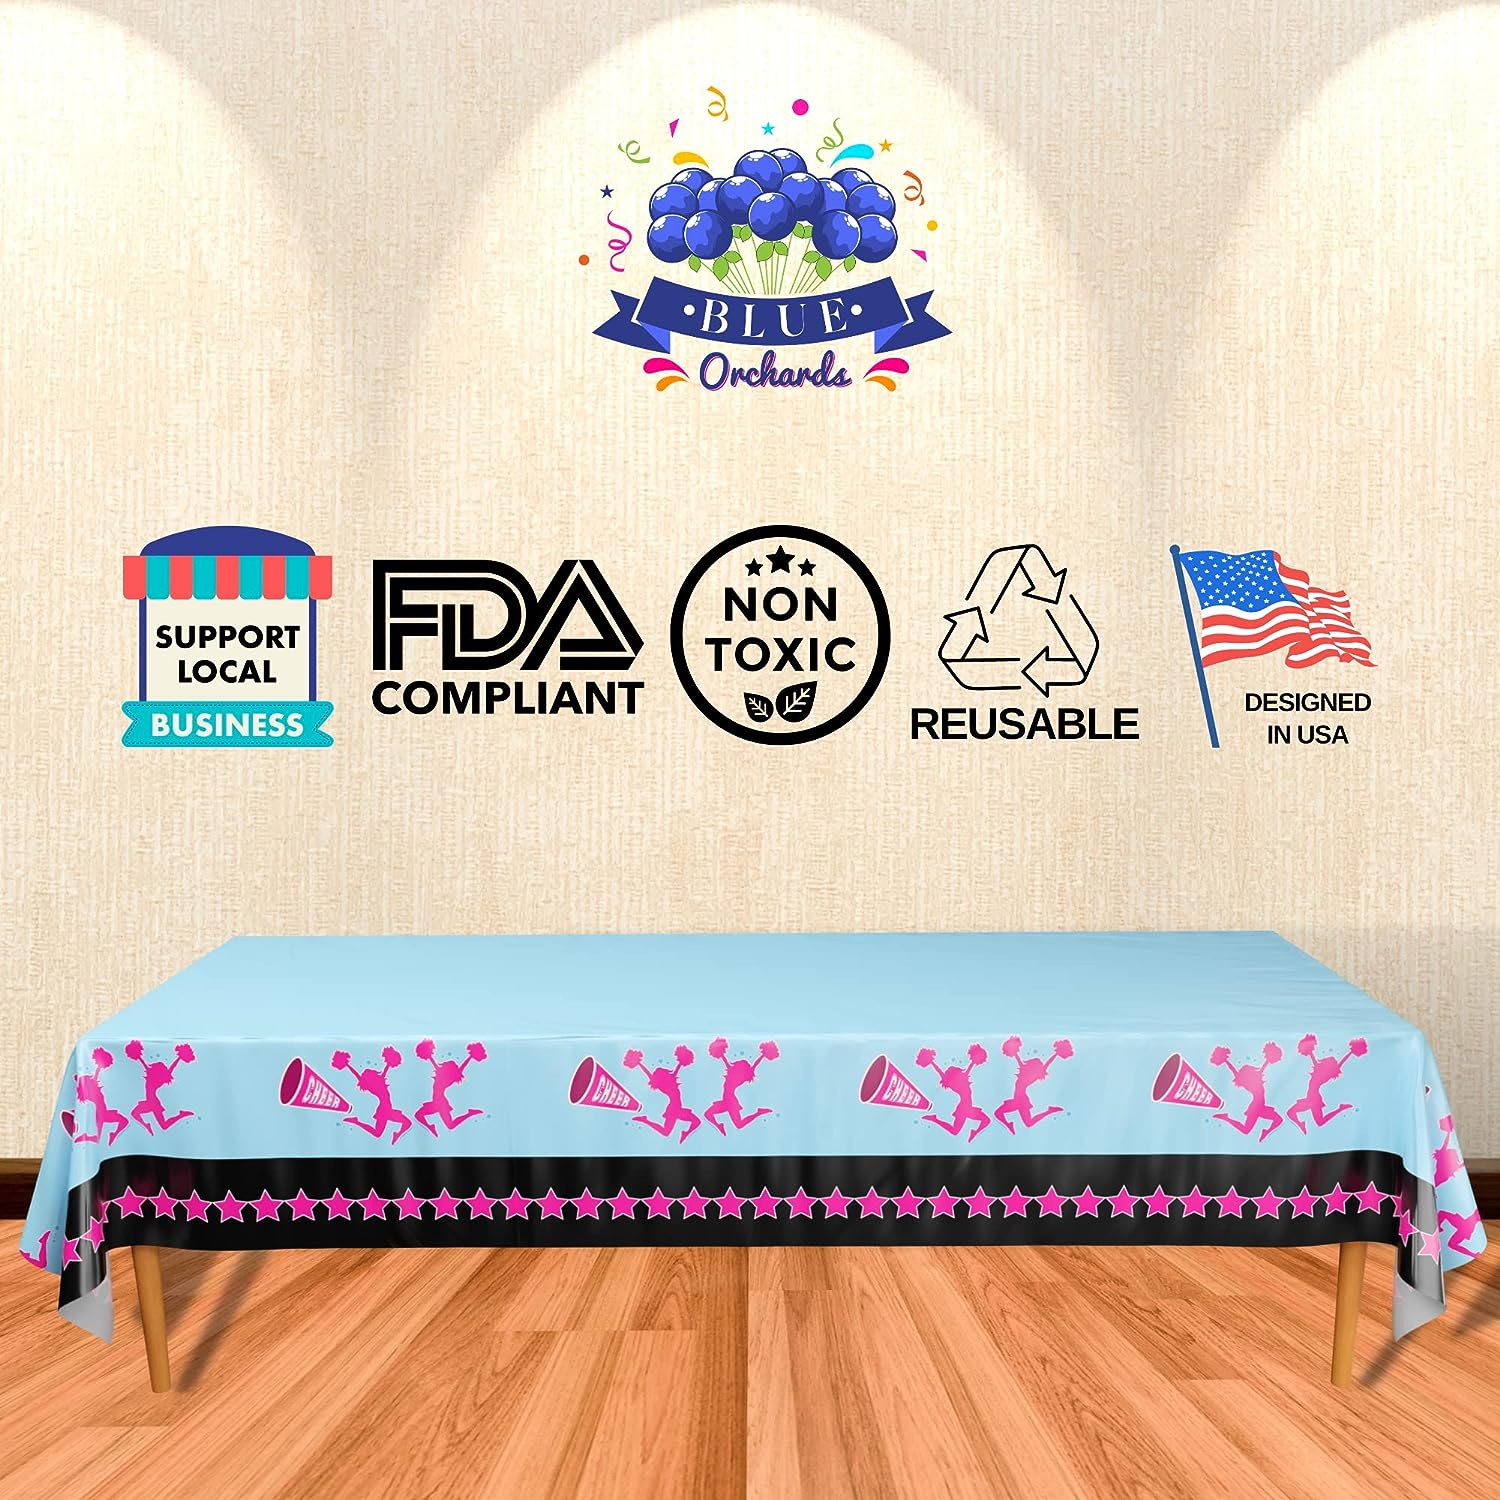 Cheerleading Table Covers - Support Local, FDA Compliant, Non Toxic, Reusable, Designed in USA